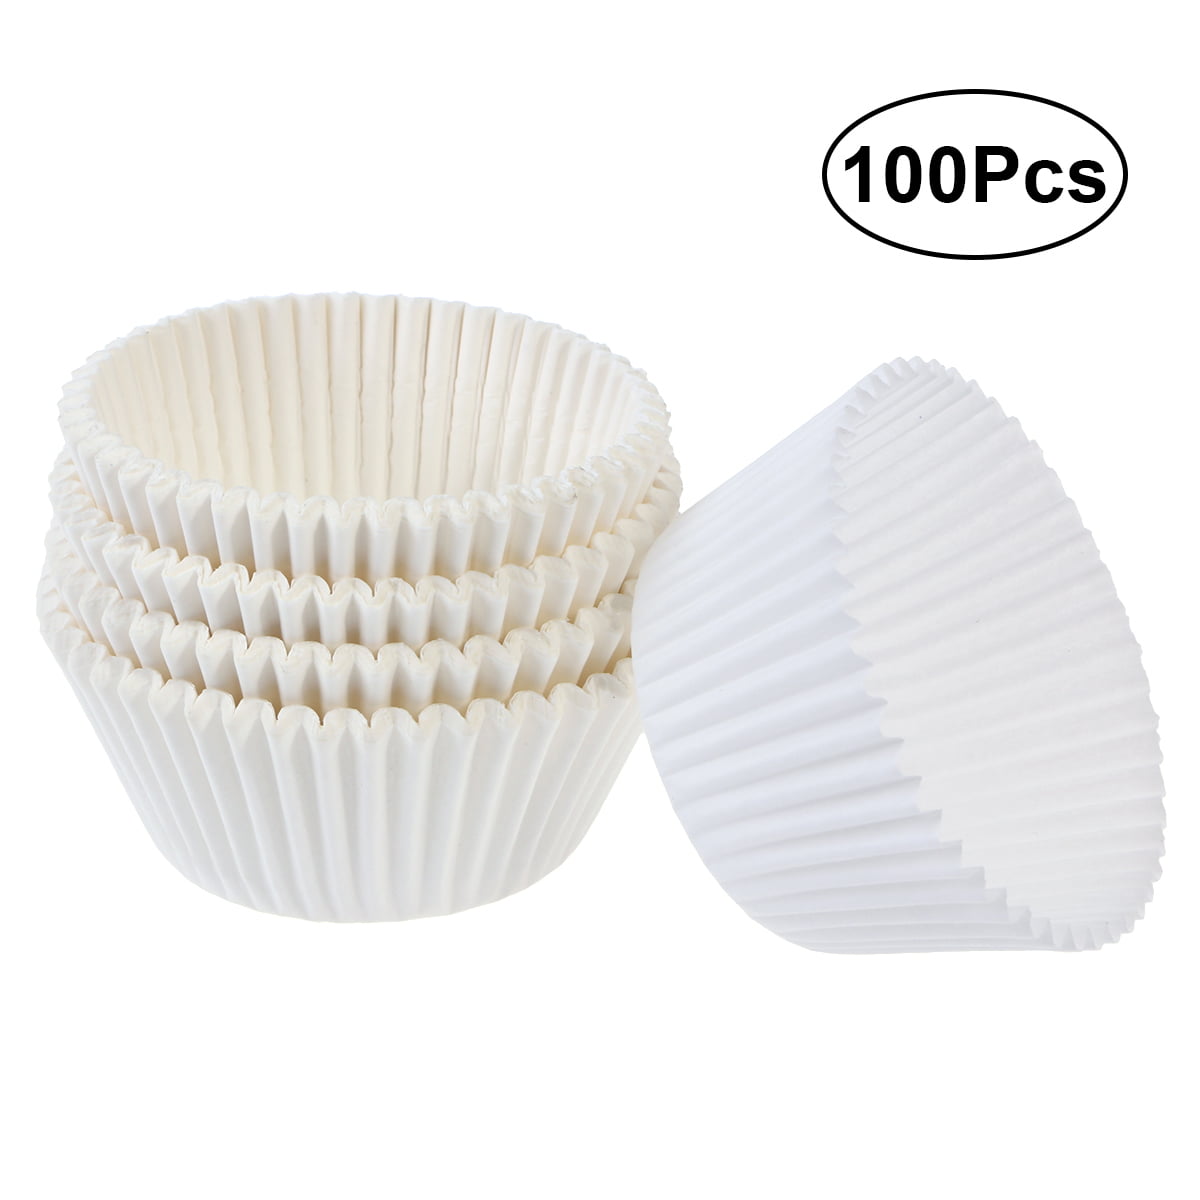 Liner Party Supplies Cupcake Wrappers Baking Cup Muffin Cases Cake Paper Cups 